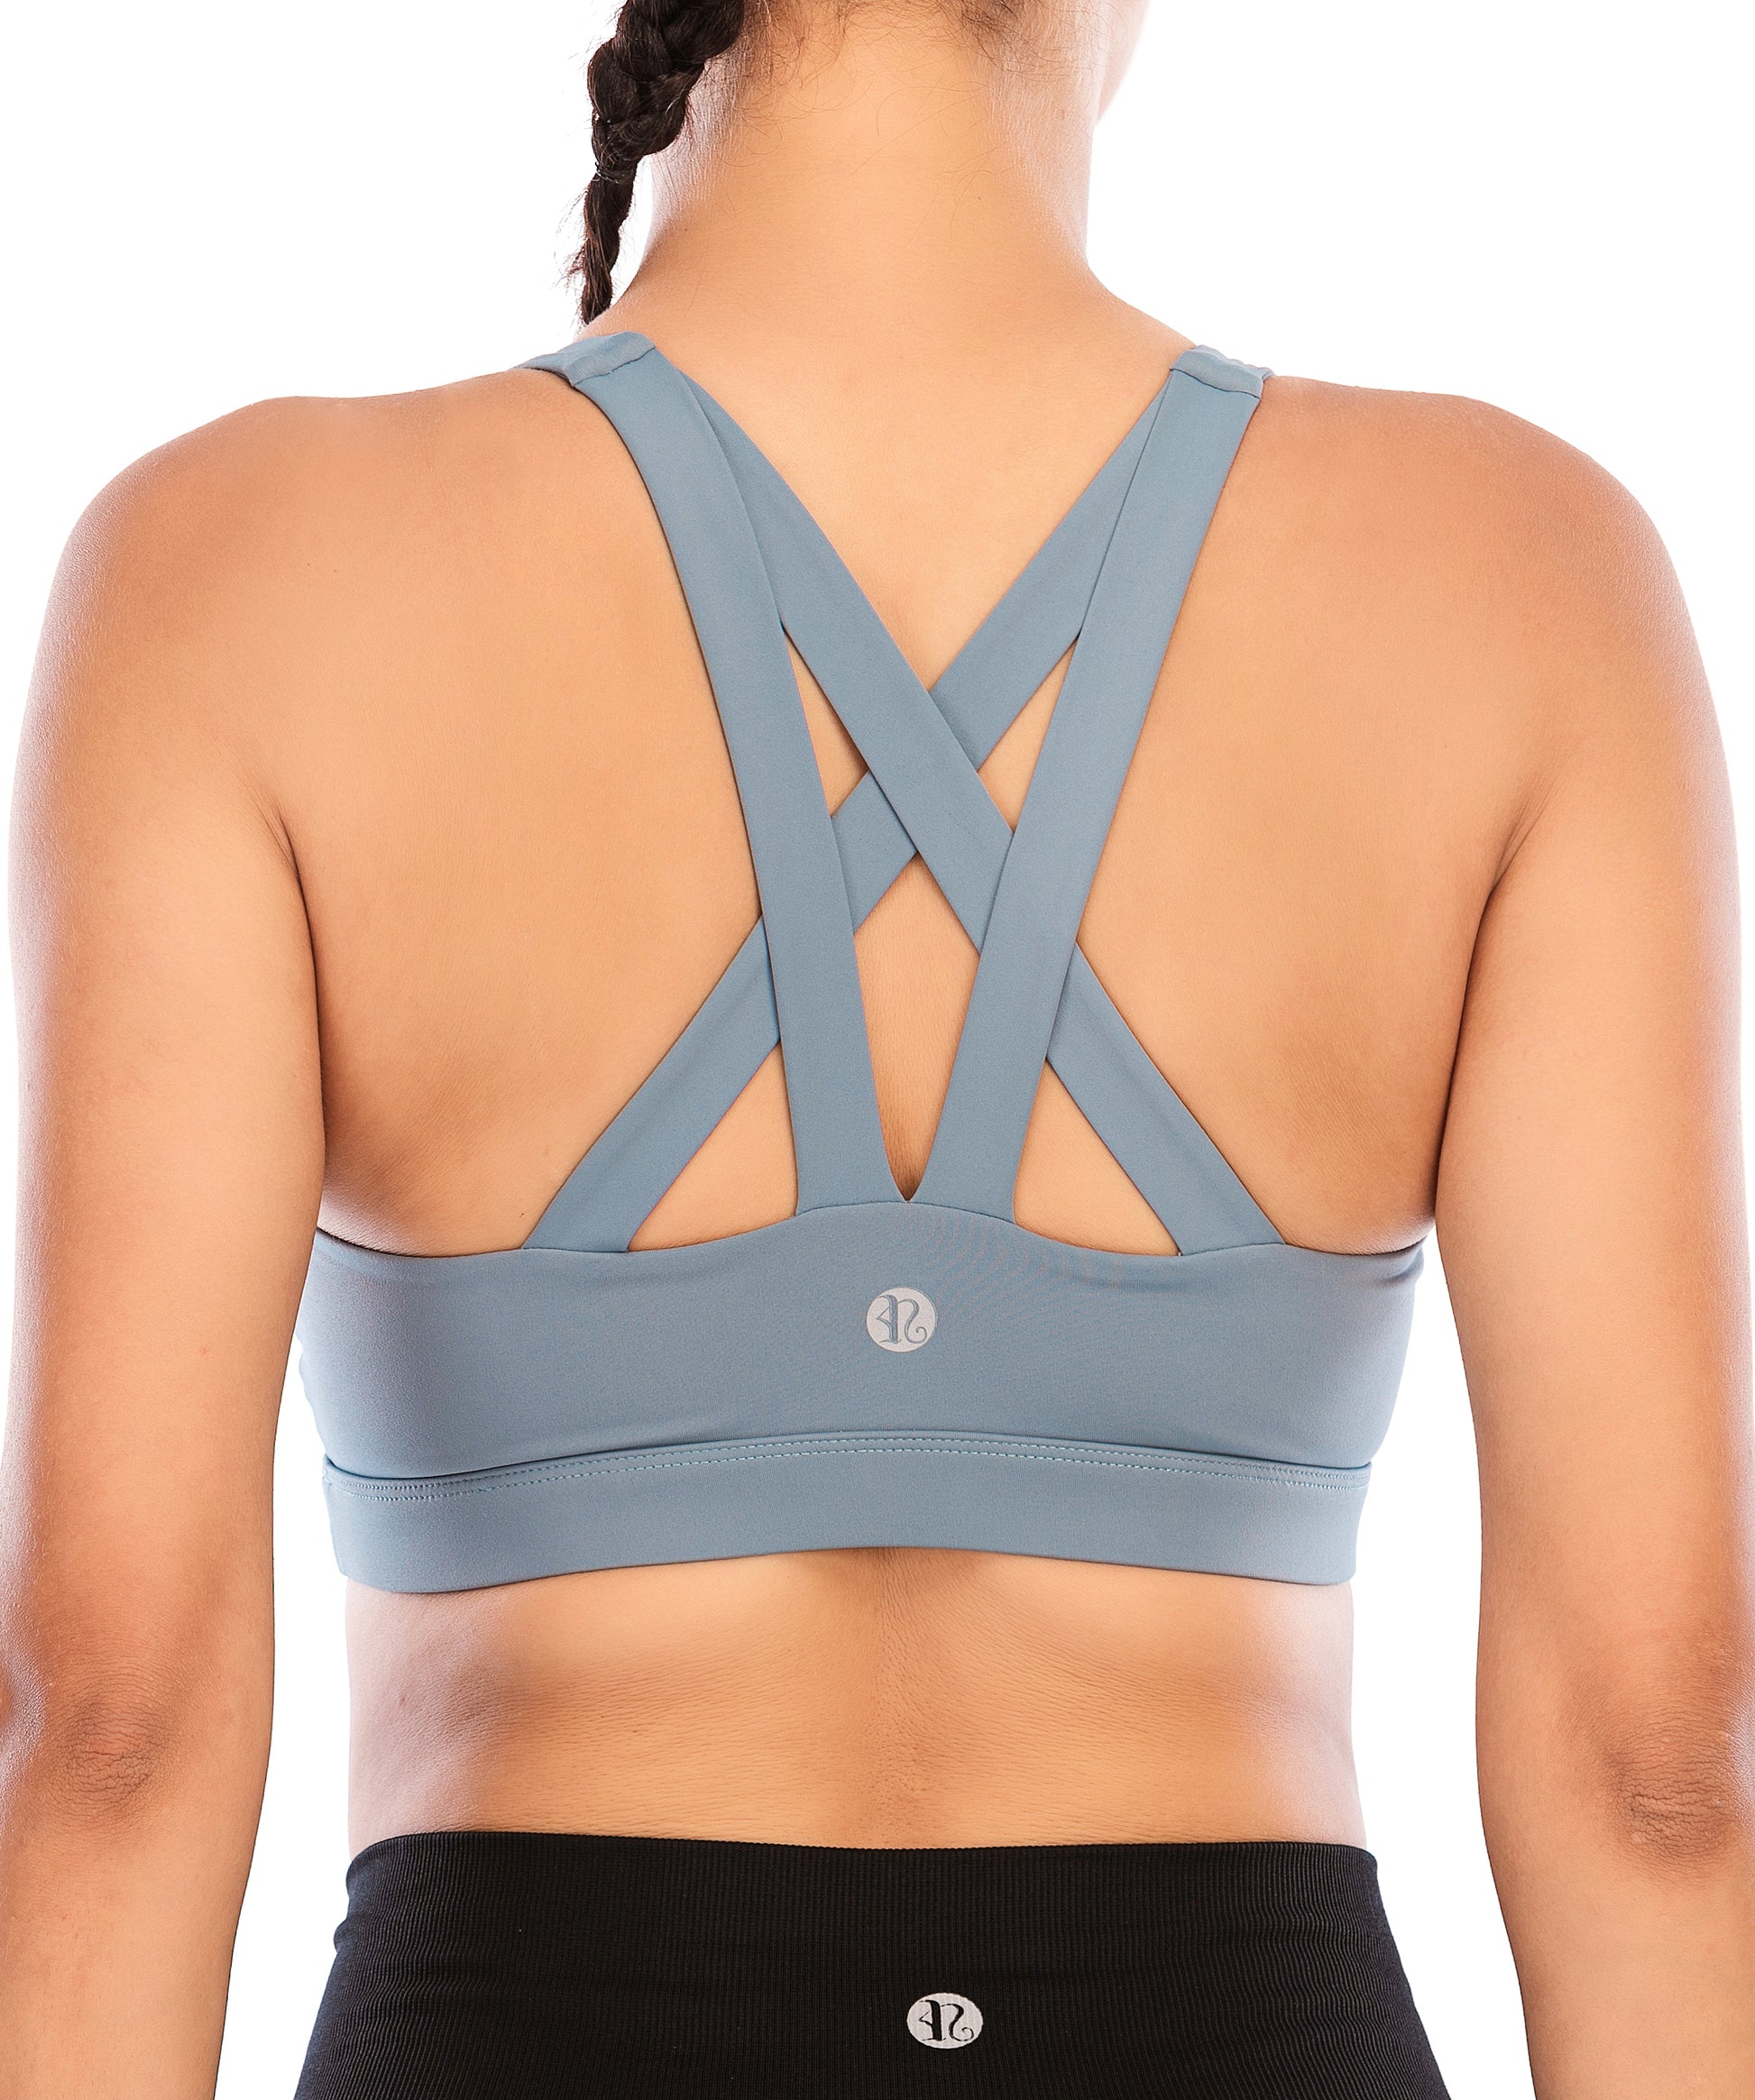 Buy RUNNING GIRL Sports Bra for Women, Criss-Cross Back Padded Strappy Sports  Bras Medium Support Yoga Bra with Removable Cups(WX2353.Black.CN:XL,US:L)  at